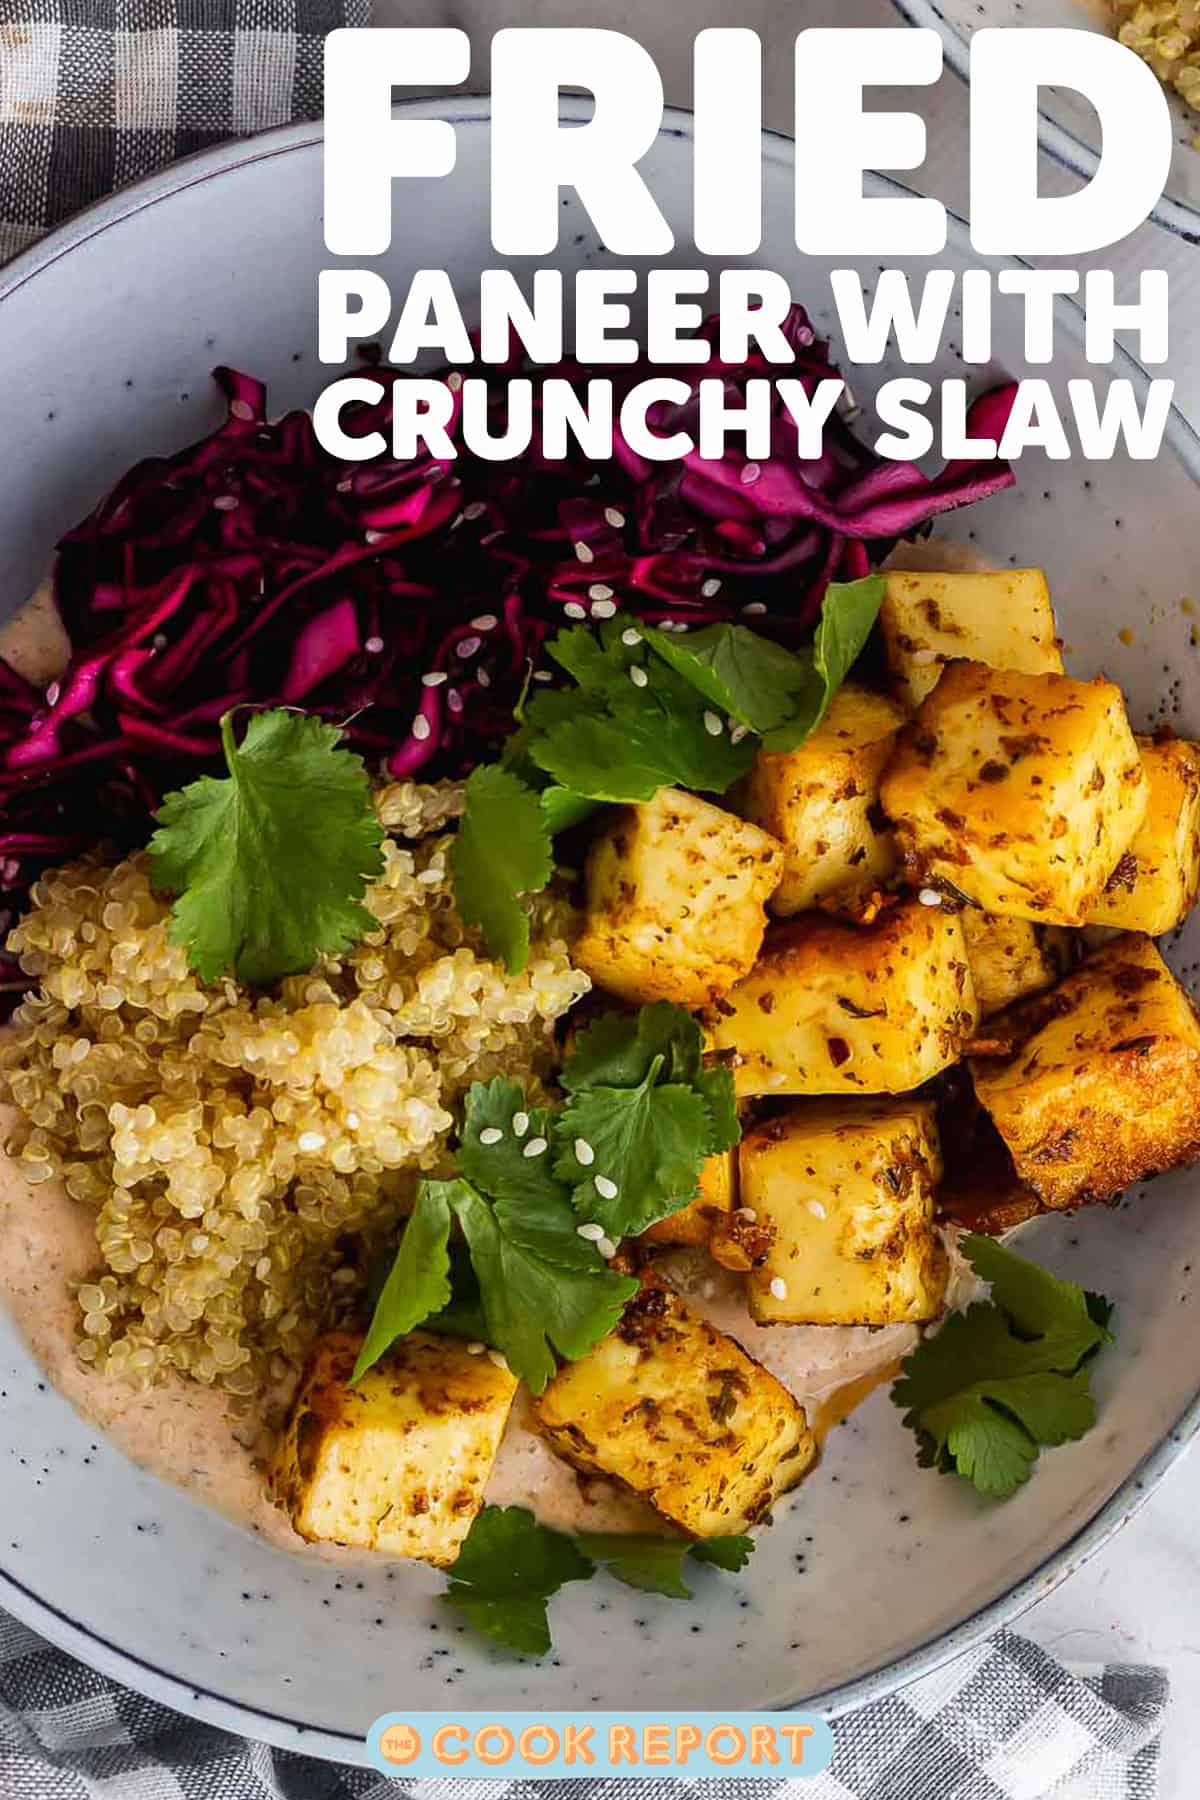 Pinterest image of fried paneer with text overlay